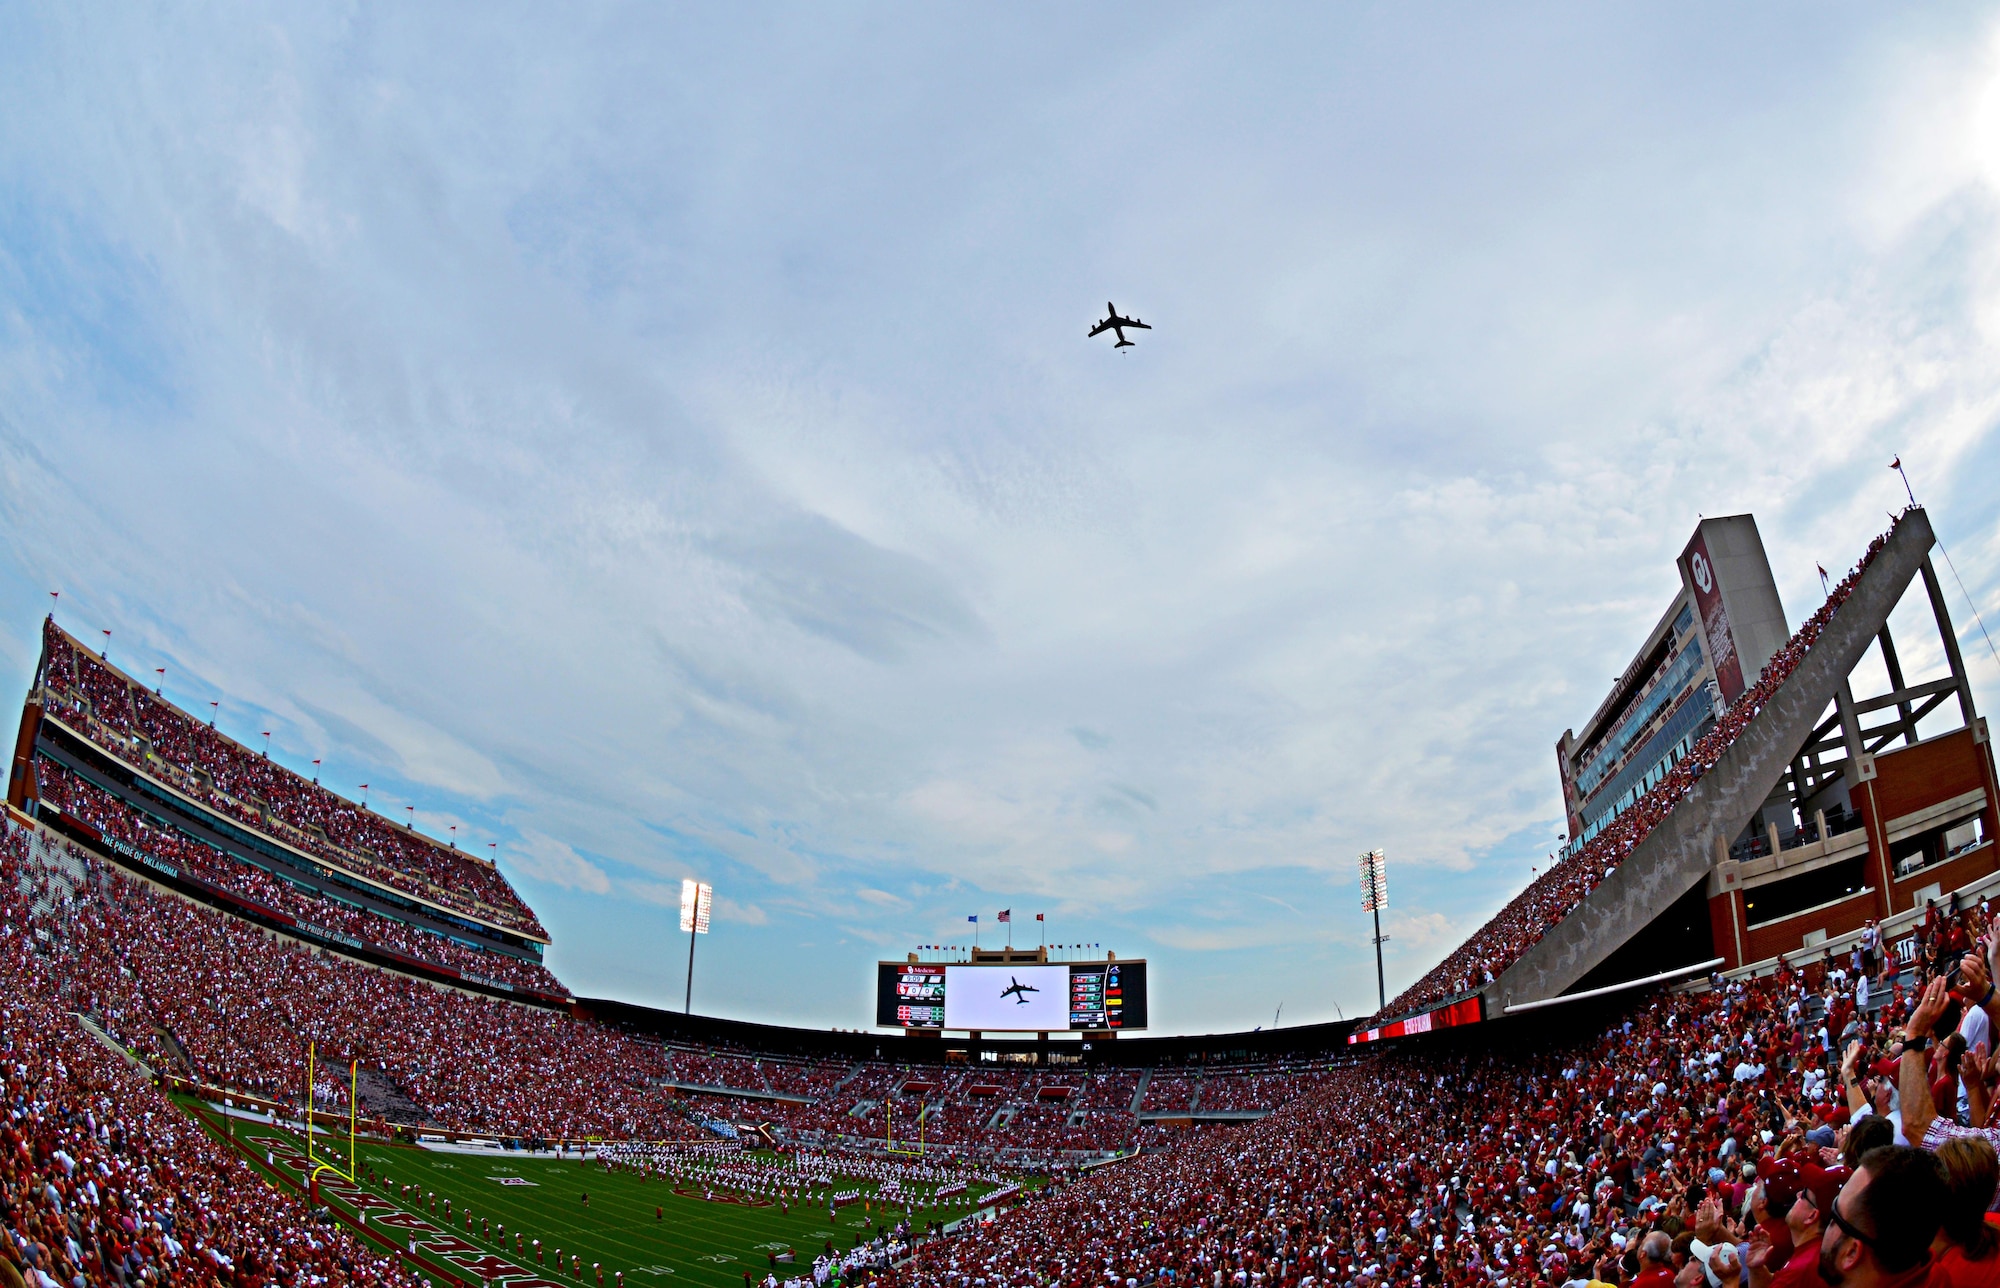 In honor of the Air Force’s 70th Anniversary, a KC-135 Stratotanker from the 507th Air Refueling Wing operating out of Tinker Air Force Base, Okla., performed a flyover Sept. 16, 2017, at a University of Oklahoma football game at the Gaylord Family Oklahoma Memorial Stadium in Norman, Okla. (U.S. Air Force photo/Master Sgt. Grady Epperly)